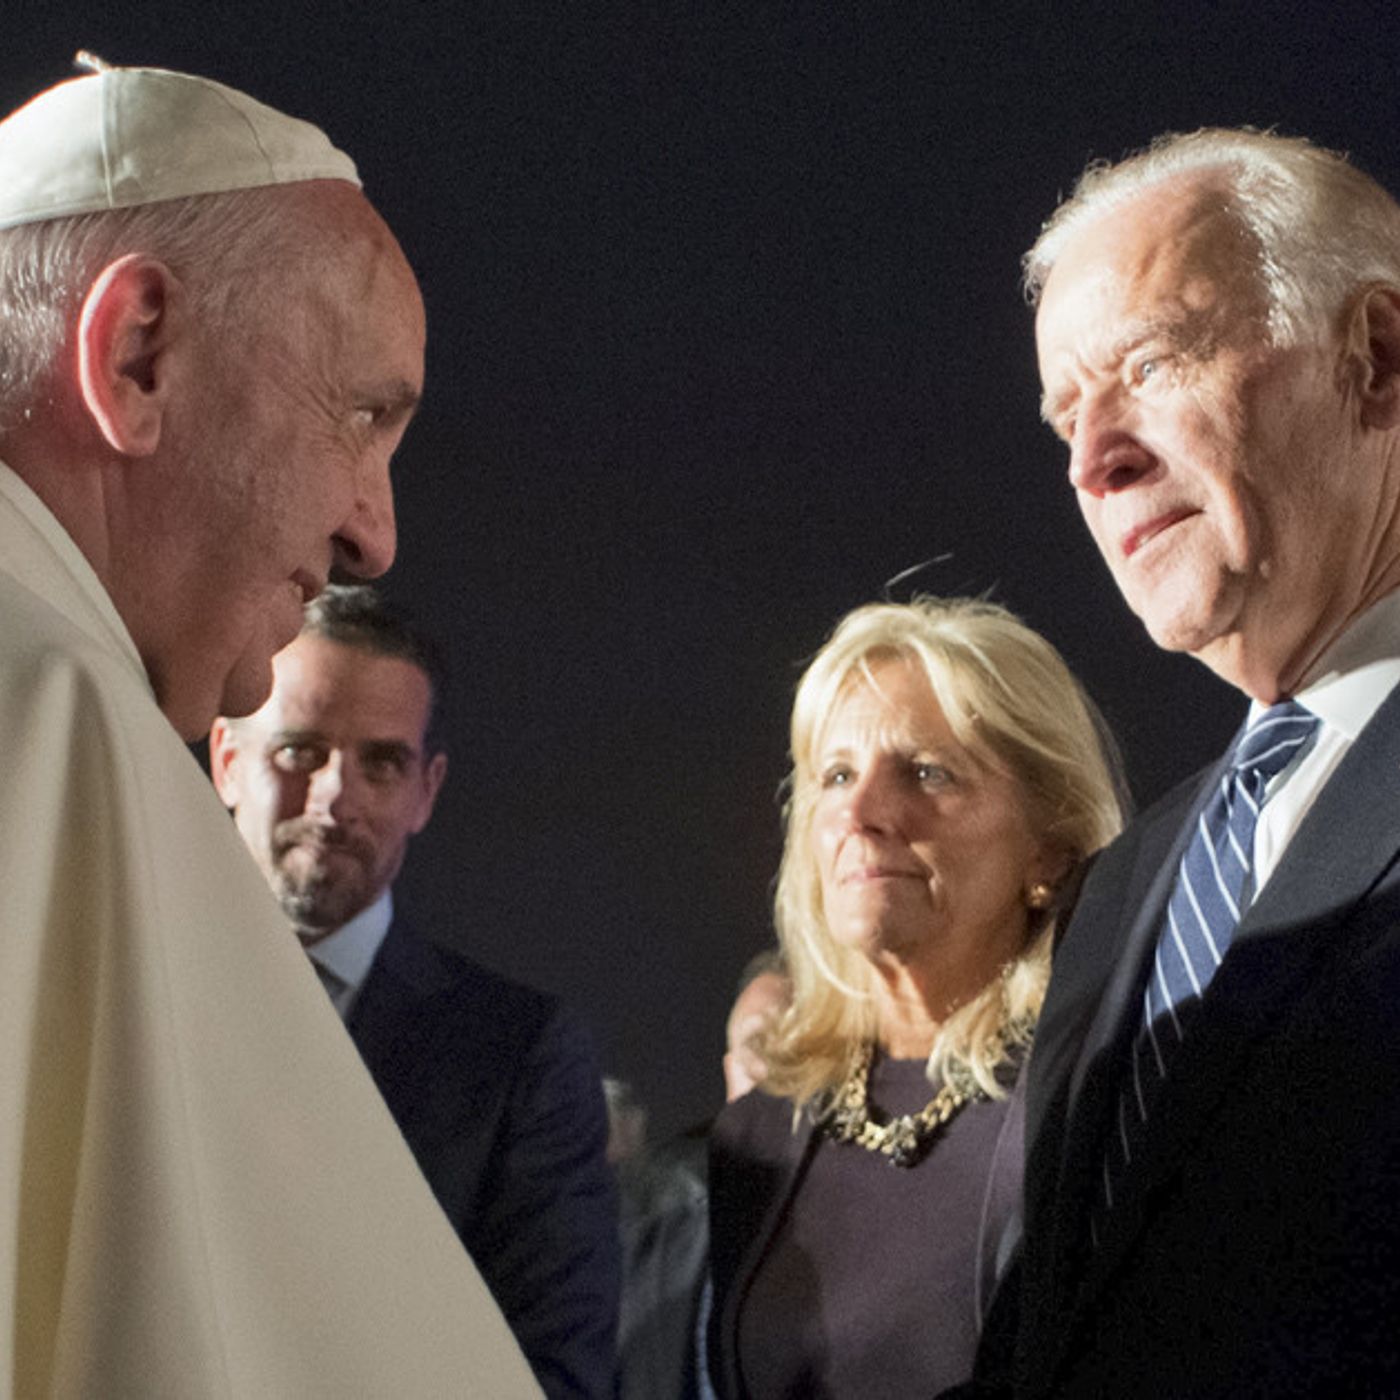 Has Pope Francis just thrown Joe Biden under the bus on abortion?